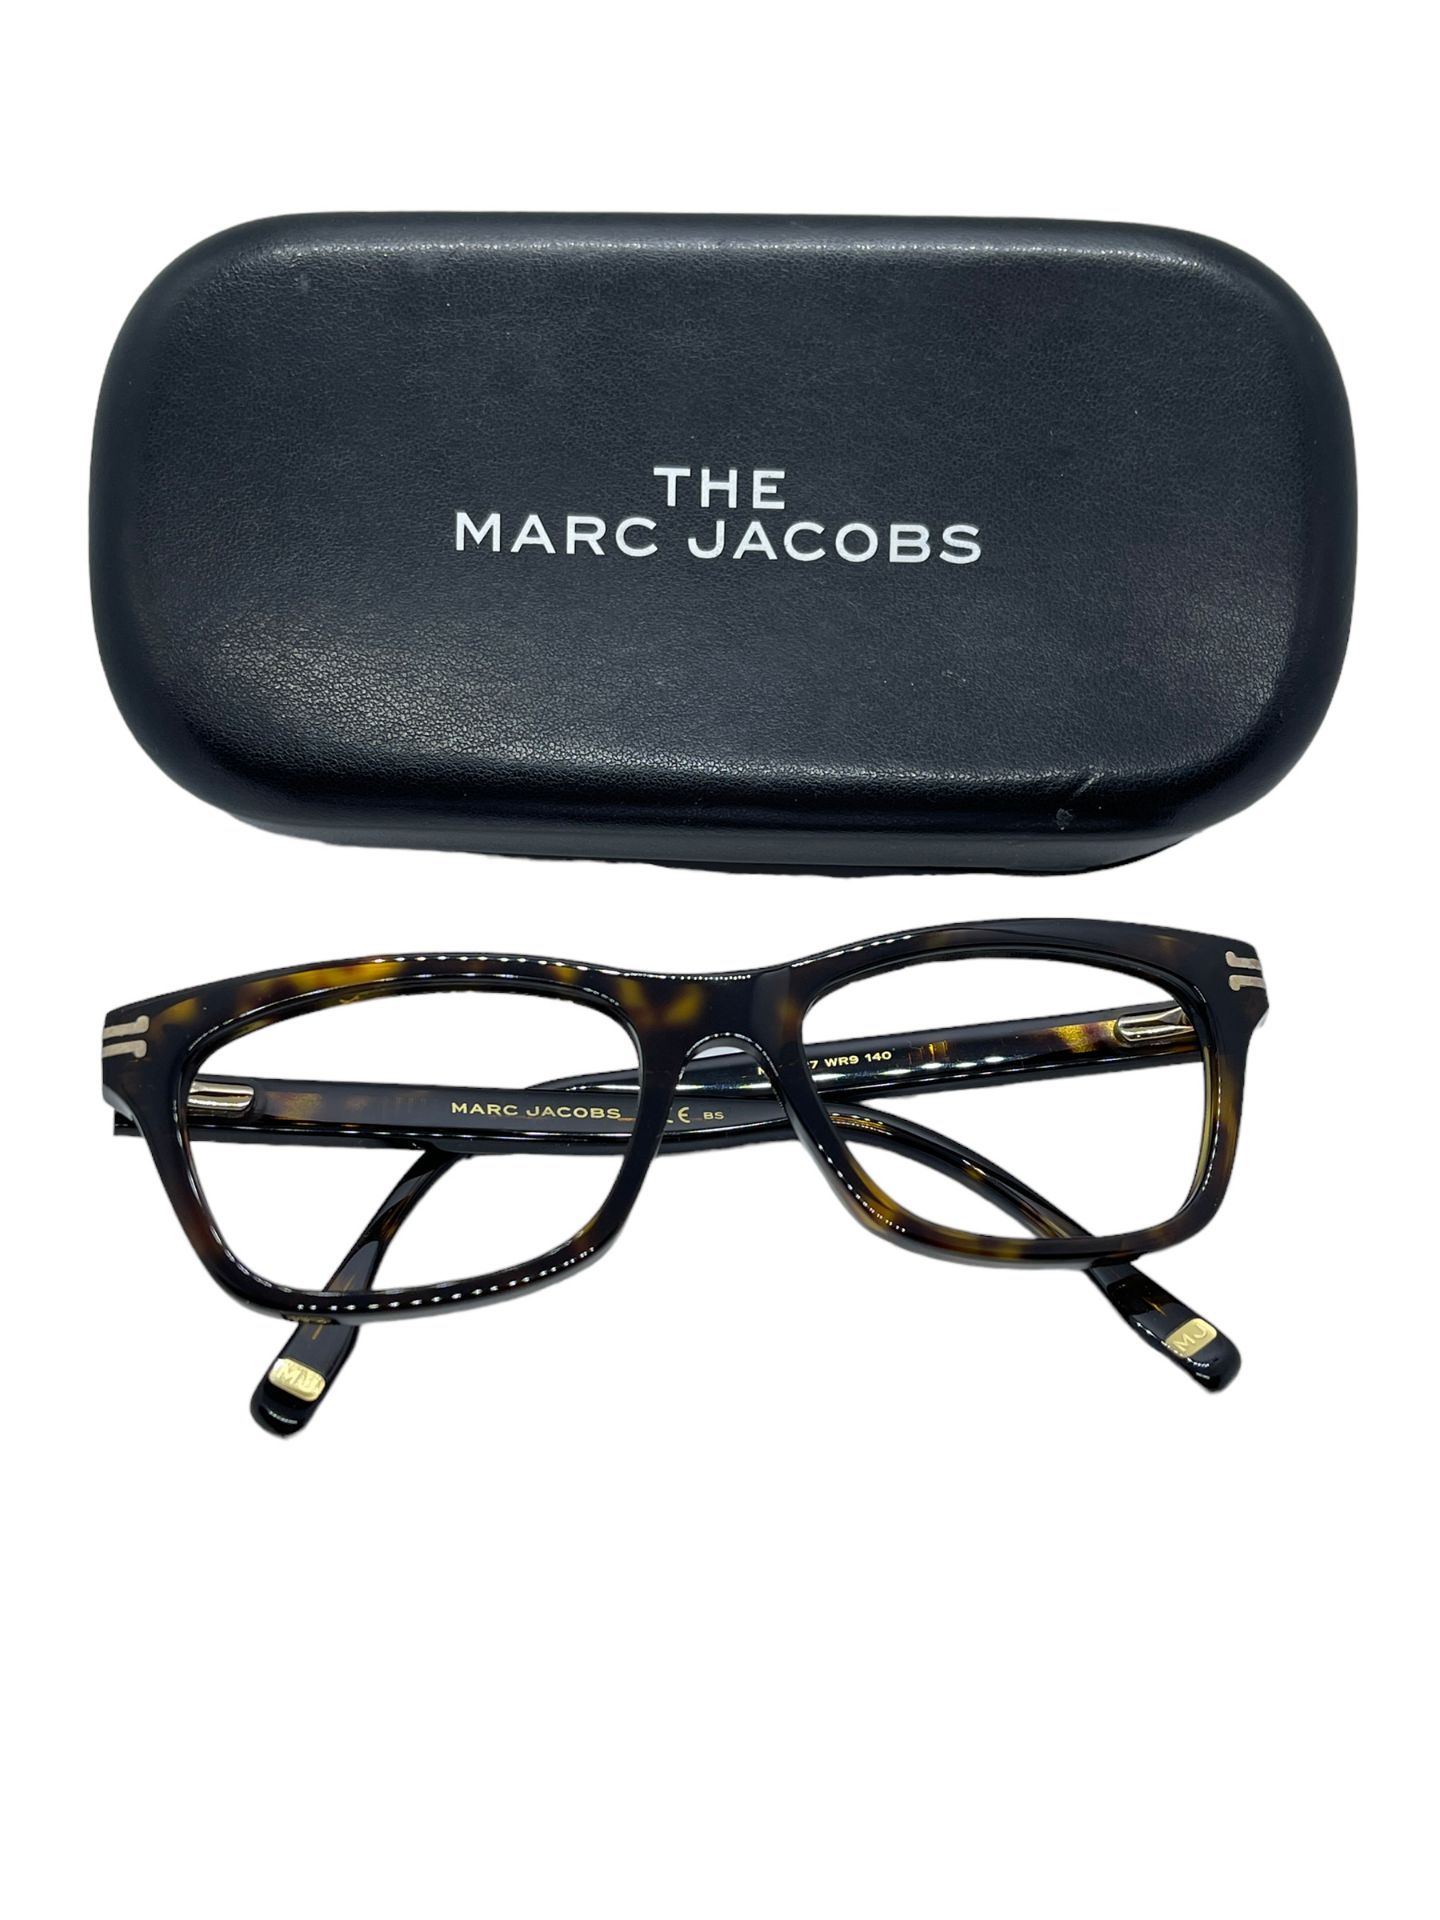 Marc Jacob's new spectacles mens. - Image 7 of 9